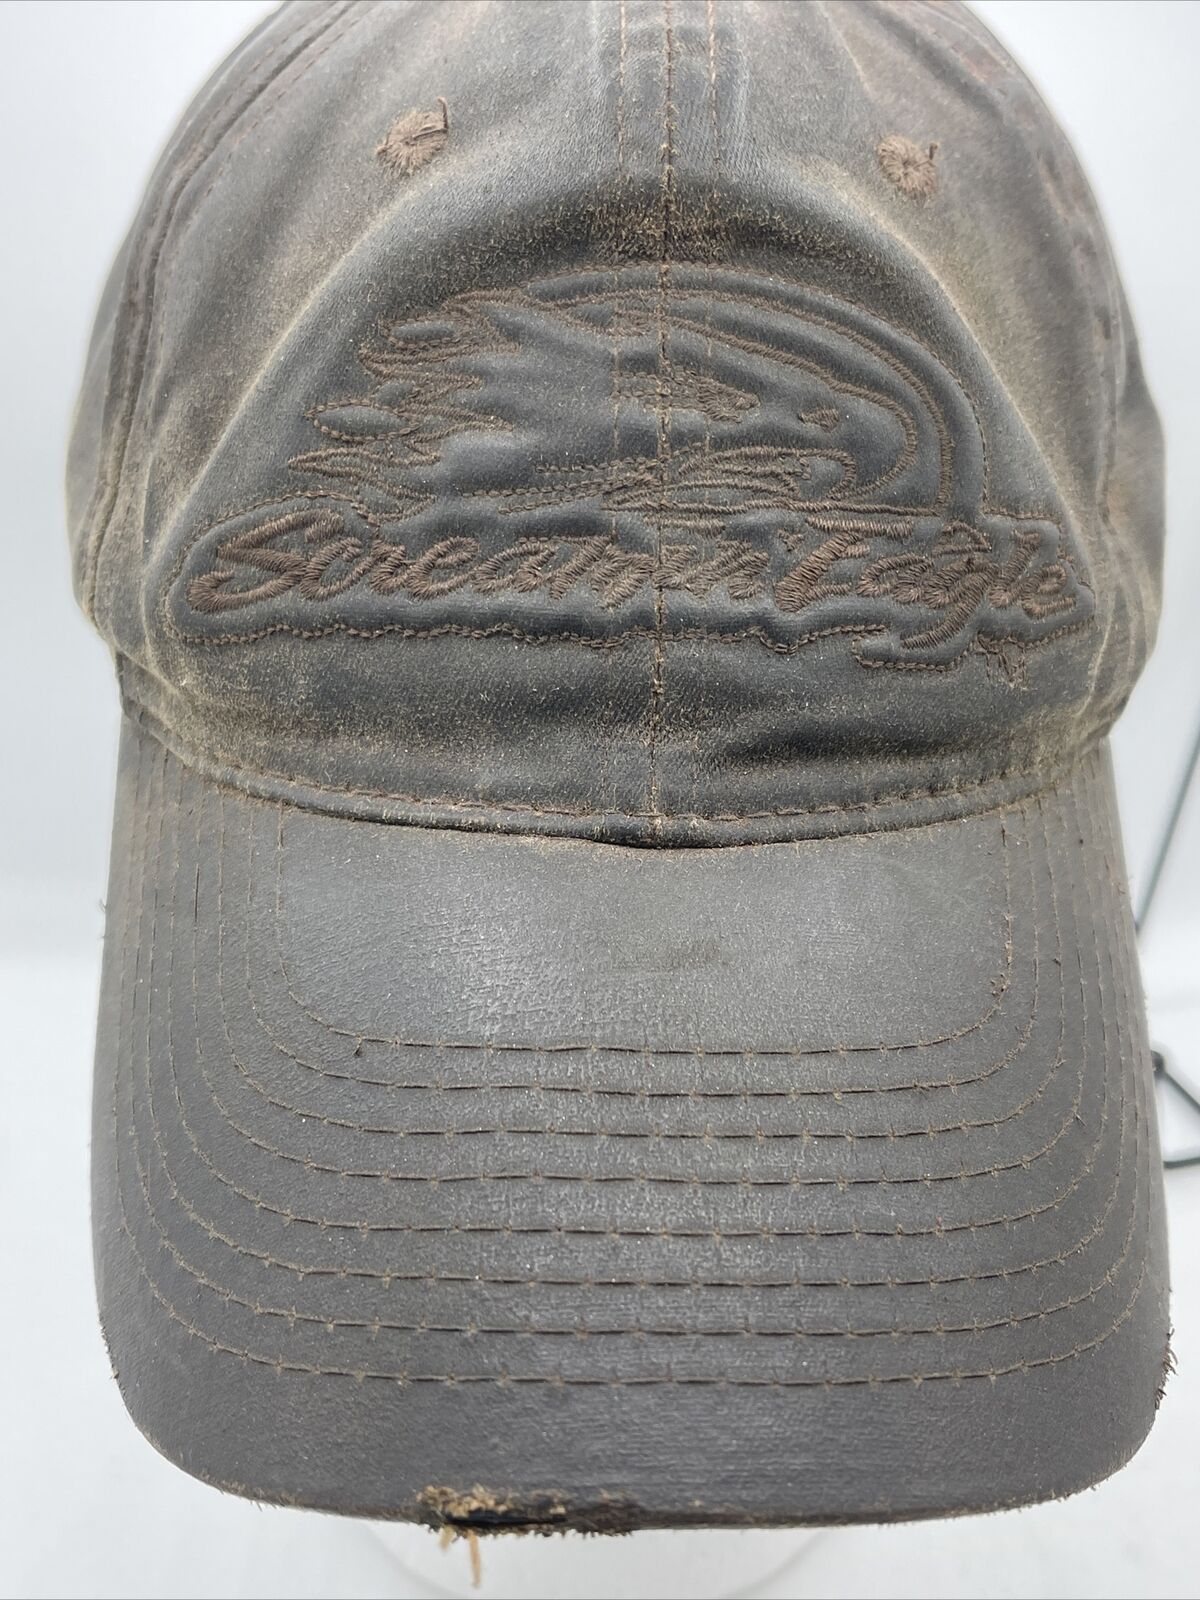 Rare Screamin Eagle Harley Davidson Leather Hat Cap Motorcycle Riding Distressed